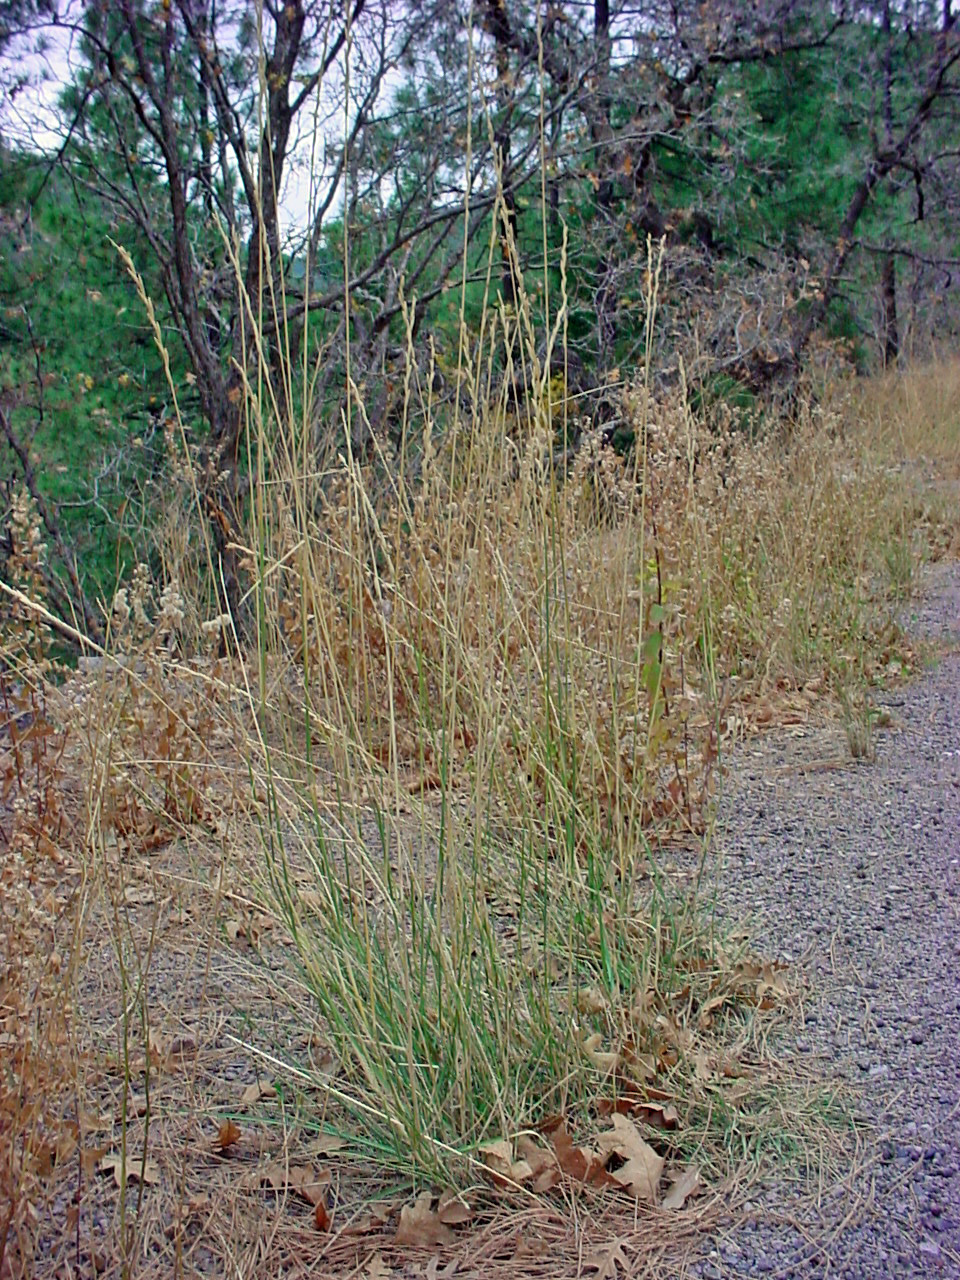 Bunch growth habit with tall, upright stems